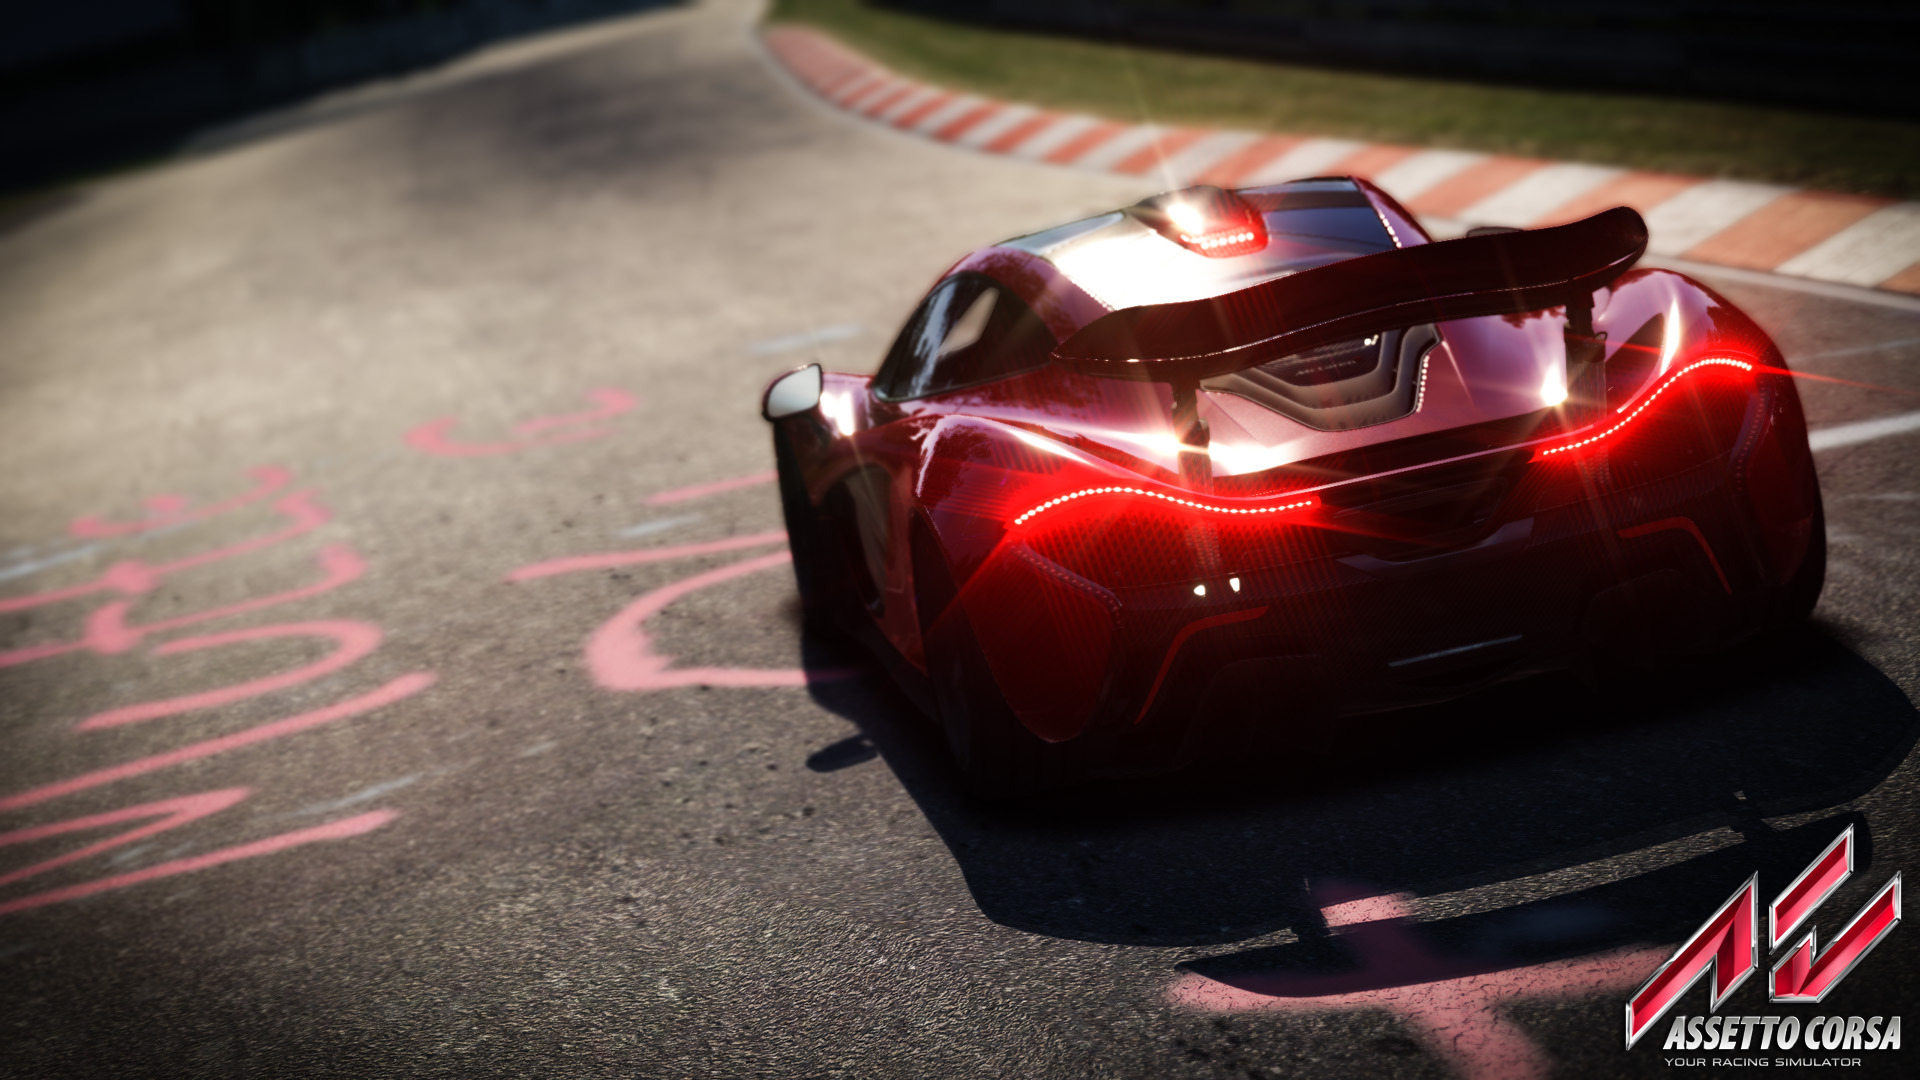 HQ Assetto Corsa Wallpapers | File 415.36Kb